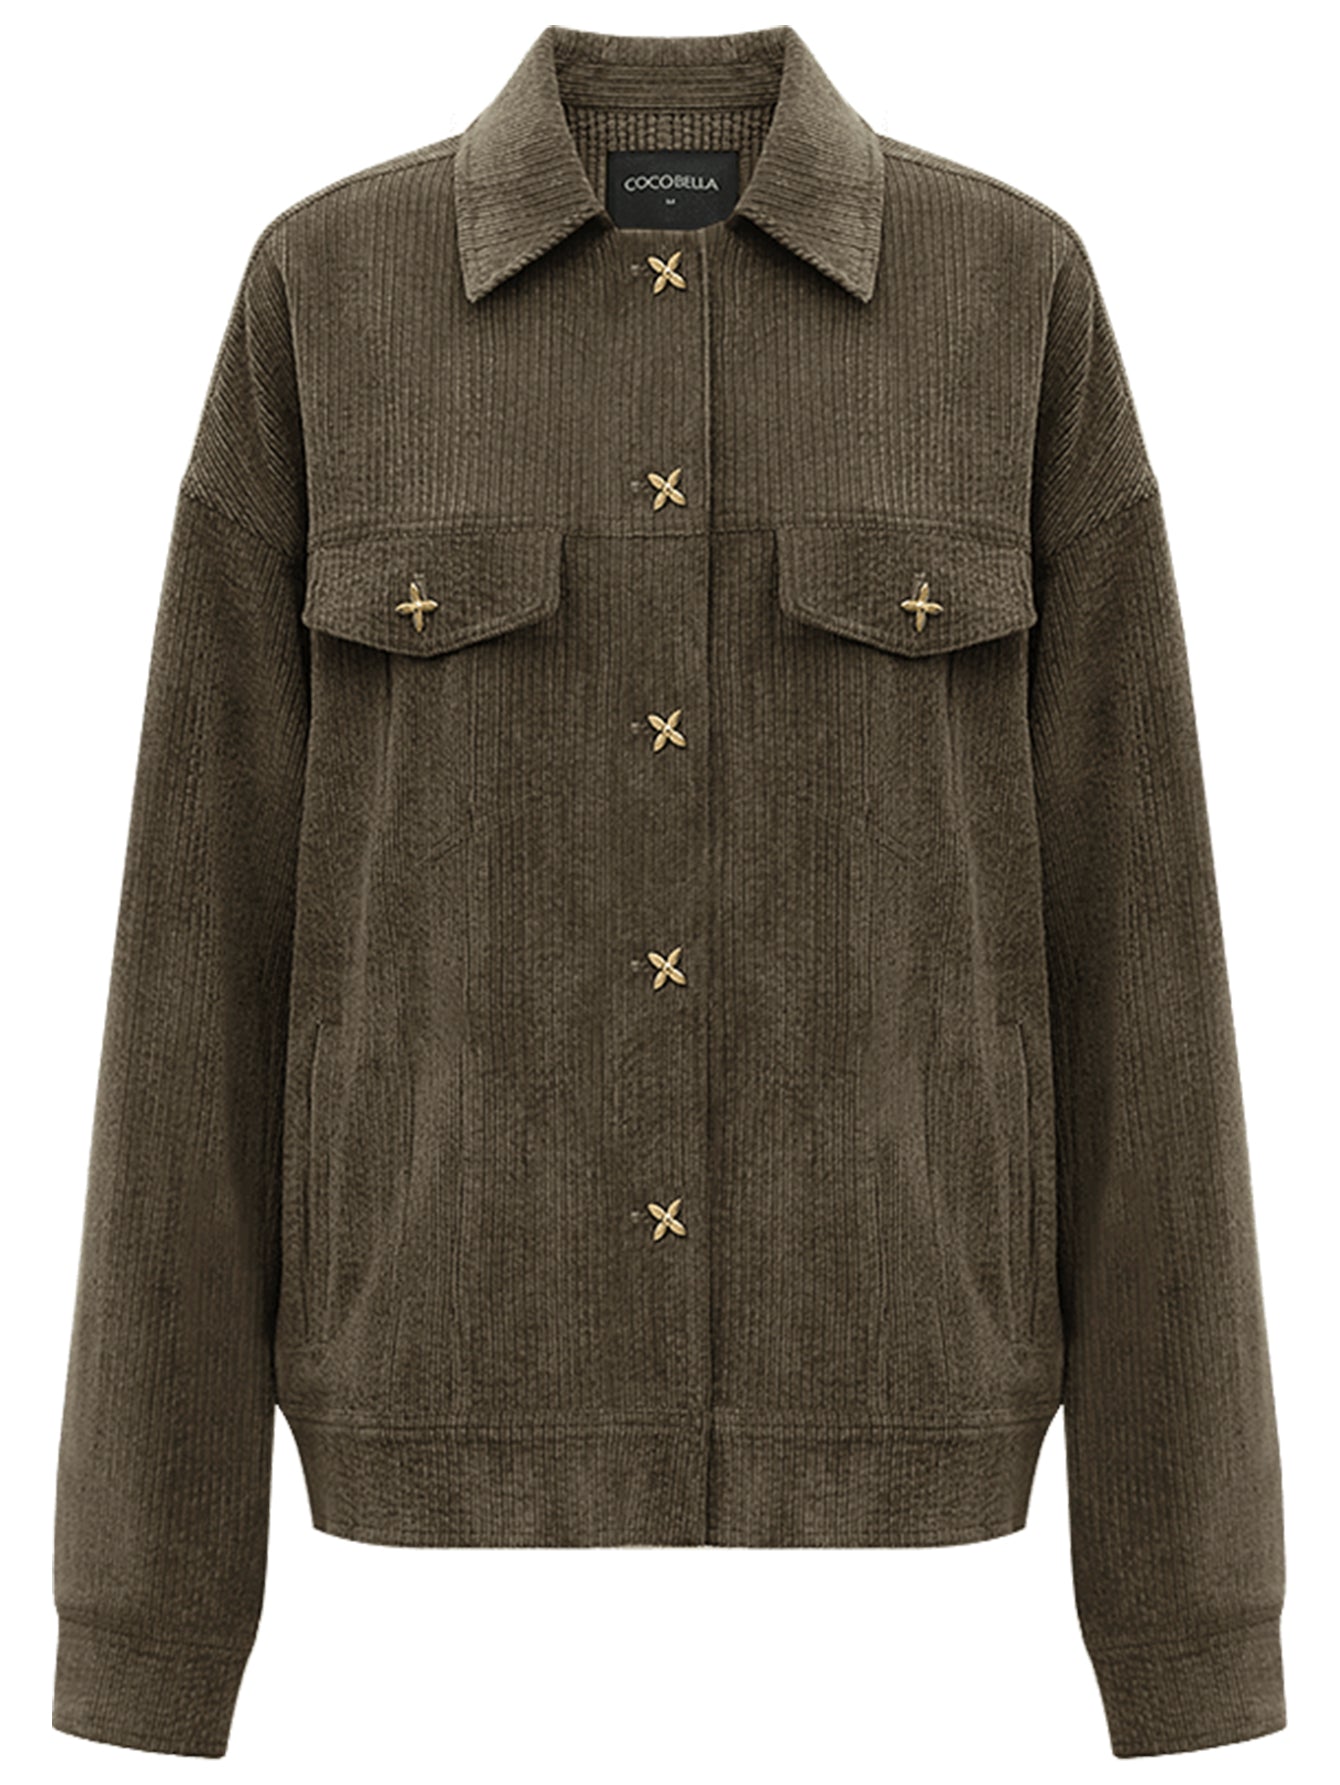 green-corduroy-jacket-with-gold-embellishments_all_green_4.jpg